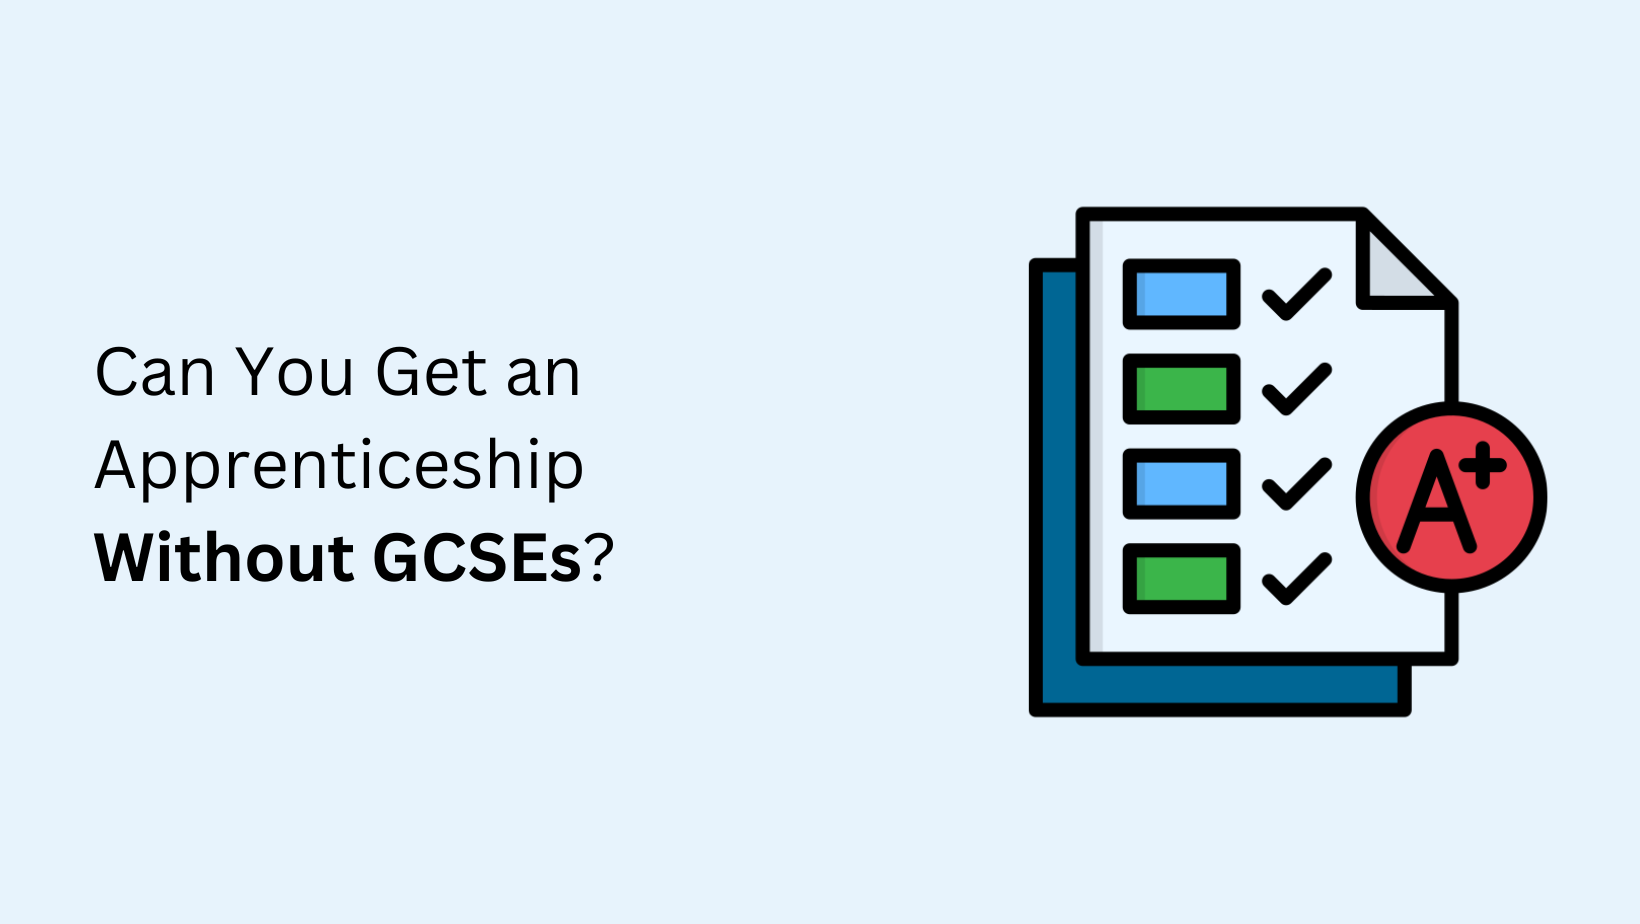 Can You Get an Apprenticeship Without GCSEs